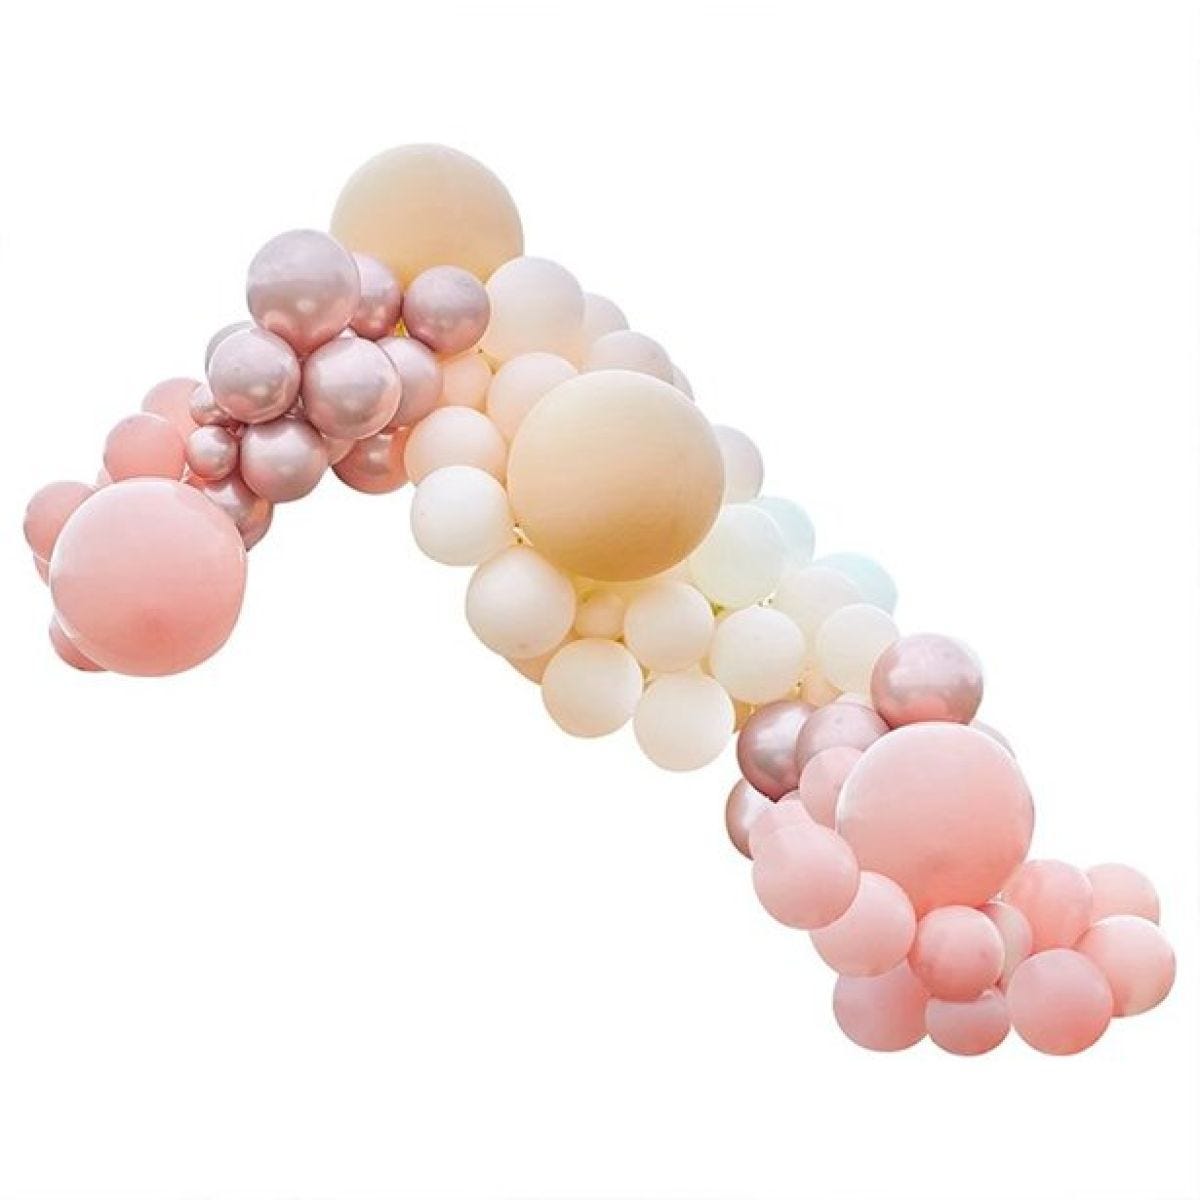 Peach, Nude & Rose Gold Large Balloon Arch DIY Kit